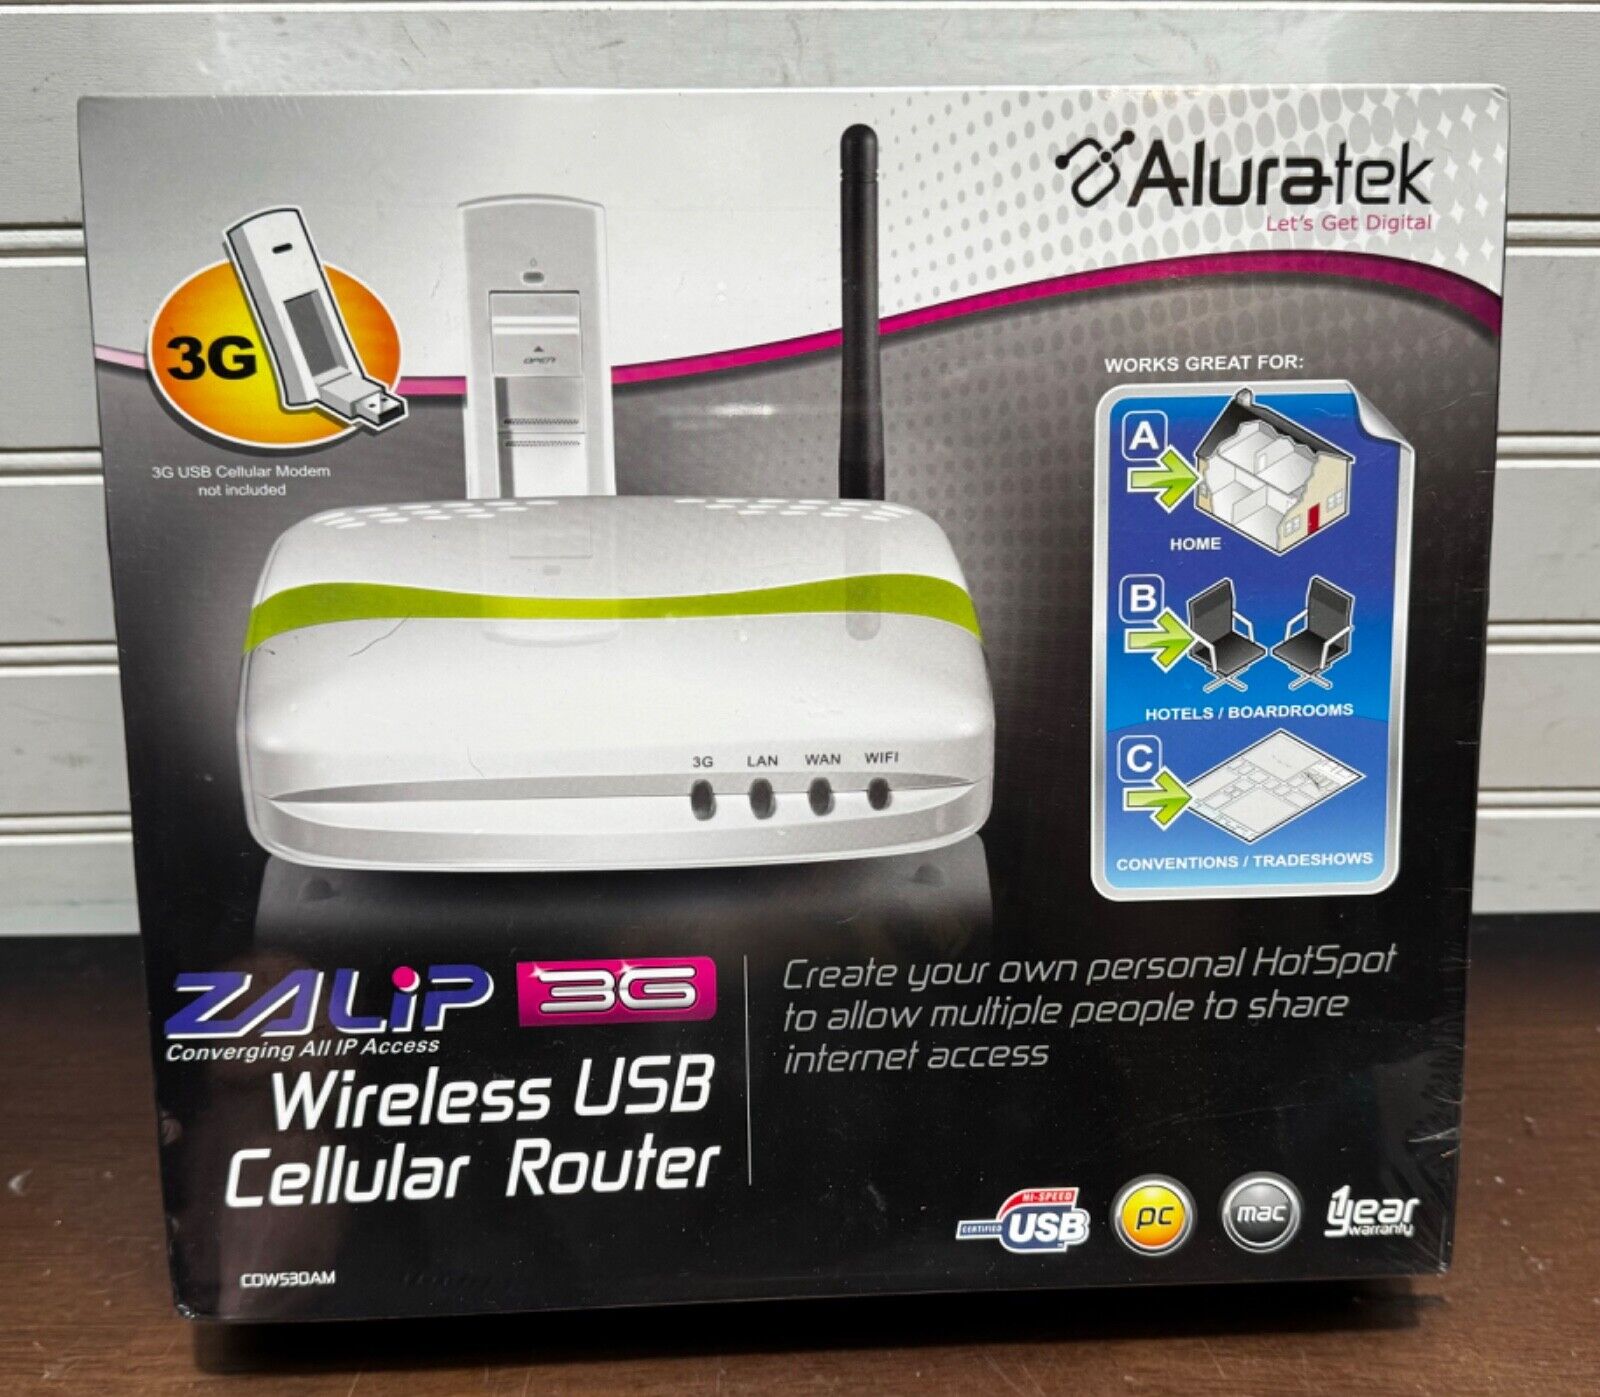 NEW Aluratek 3G  Wireless USB Cellular Router-CDW530AM (factory sealed)